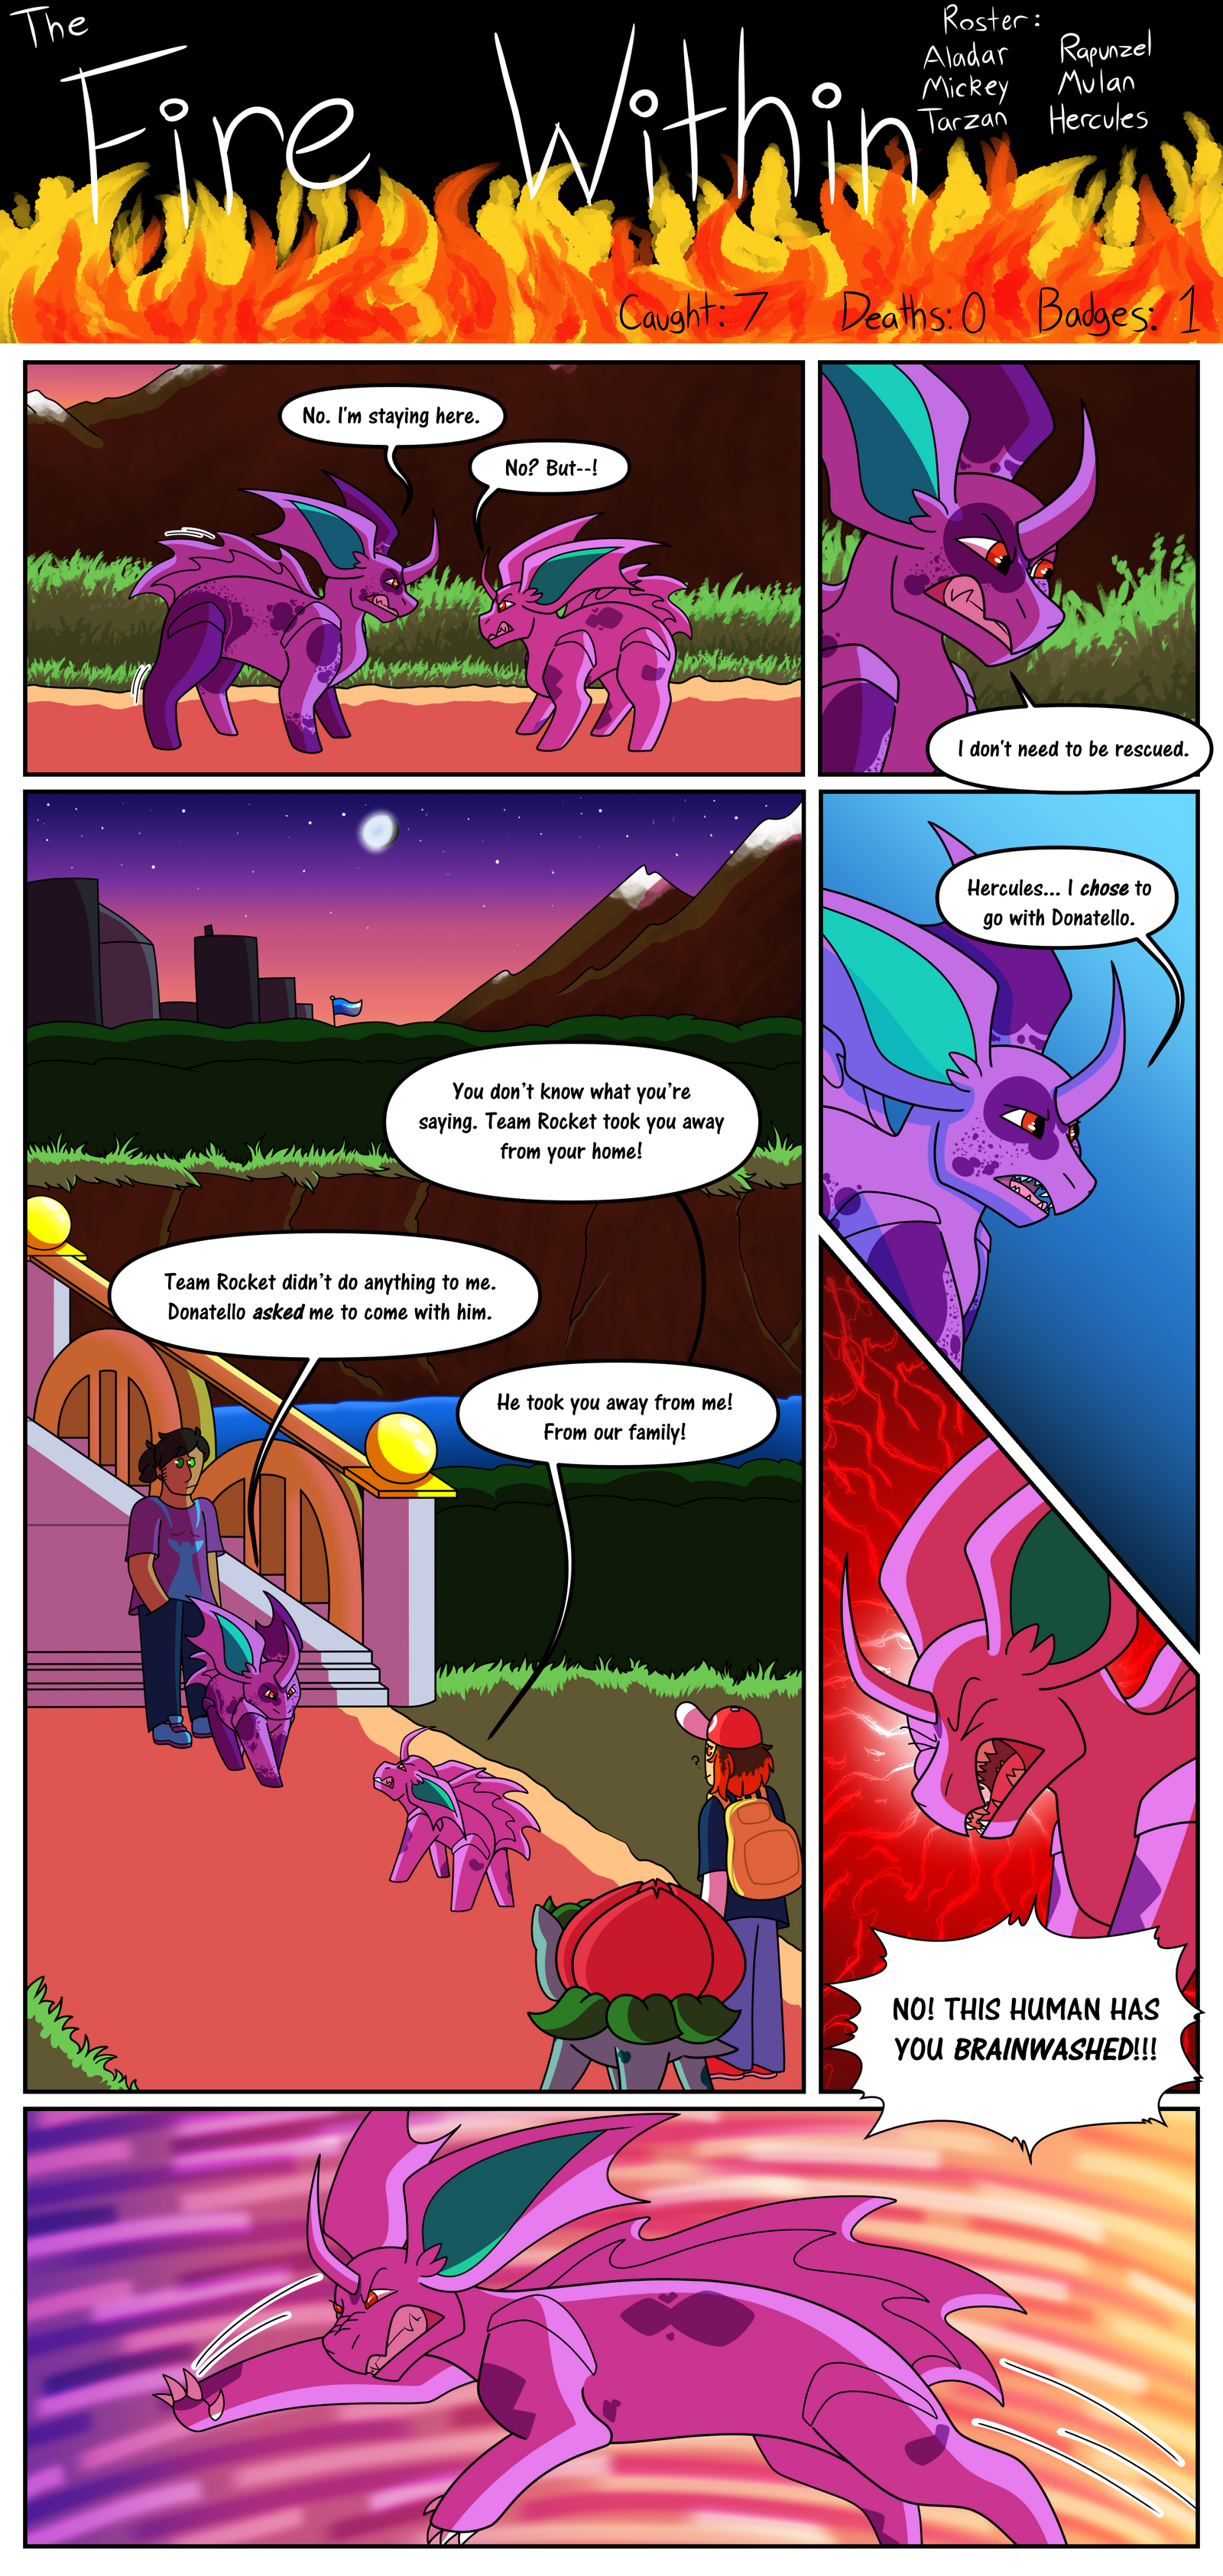 the_fire_within__firered_nuzlocke__page_59_by_xsnowshadowx_df7obog-fullview.png